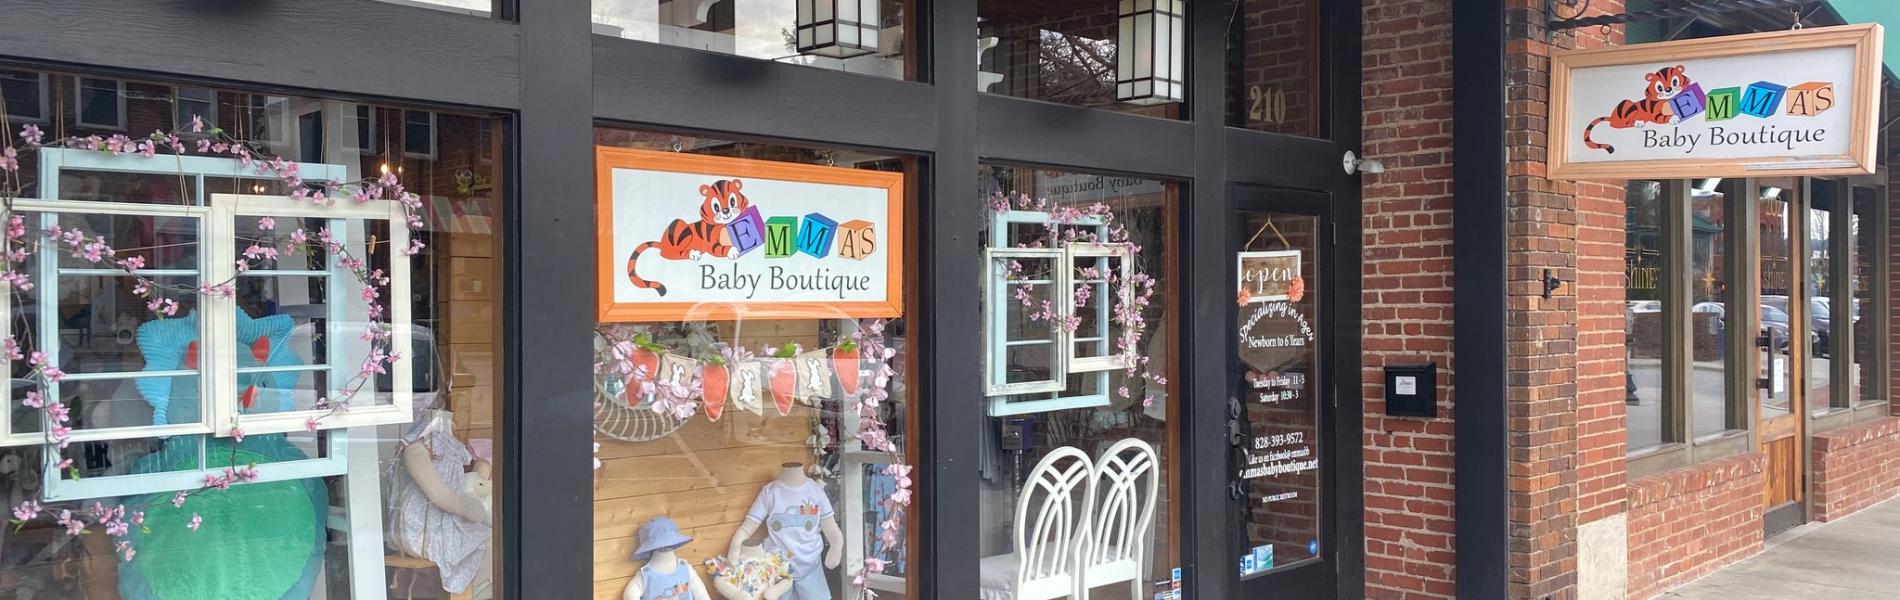 front window of emma's baby boutique